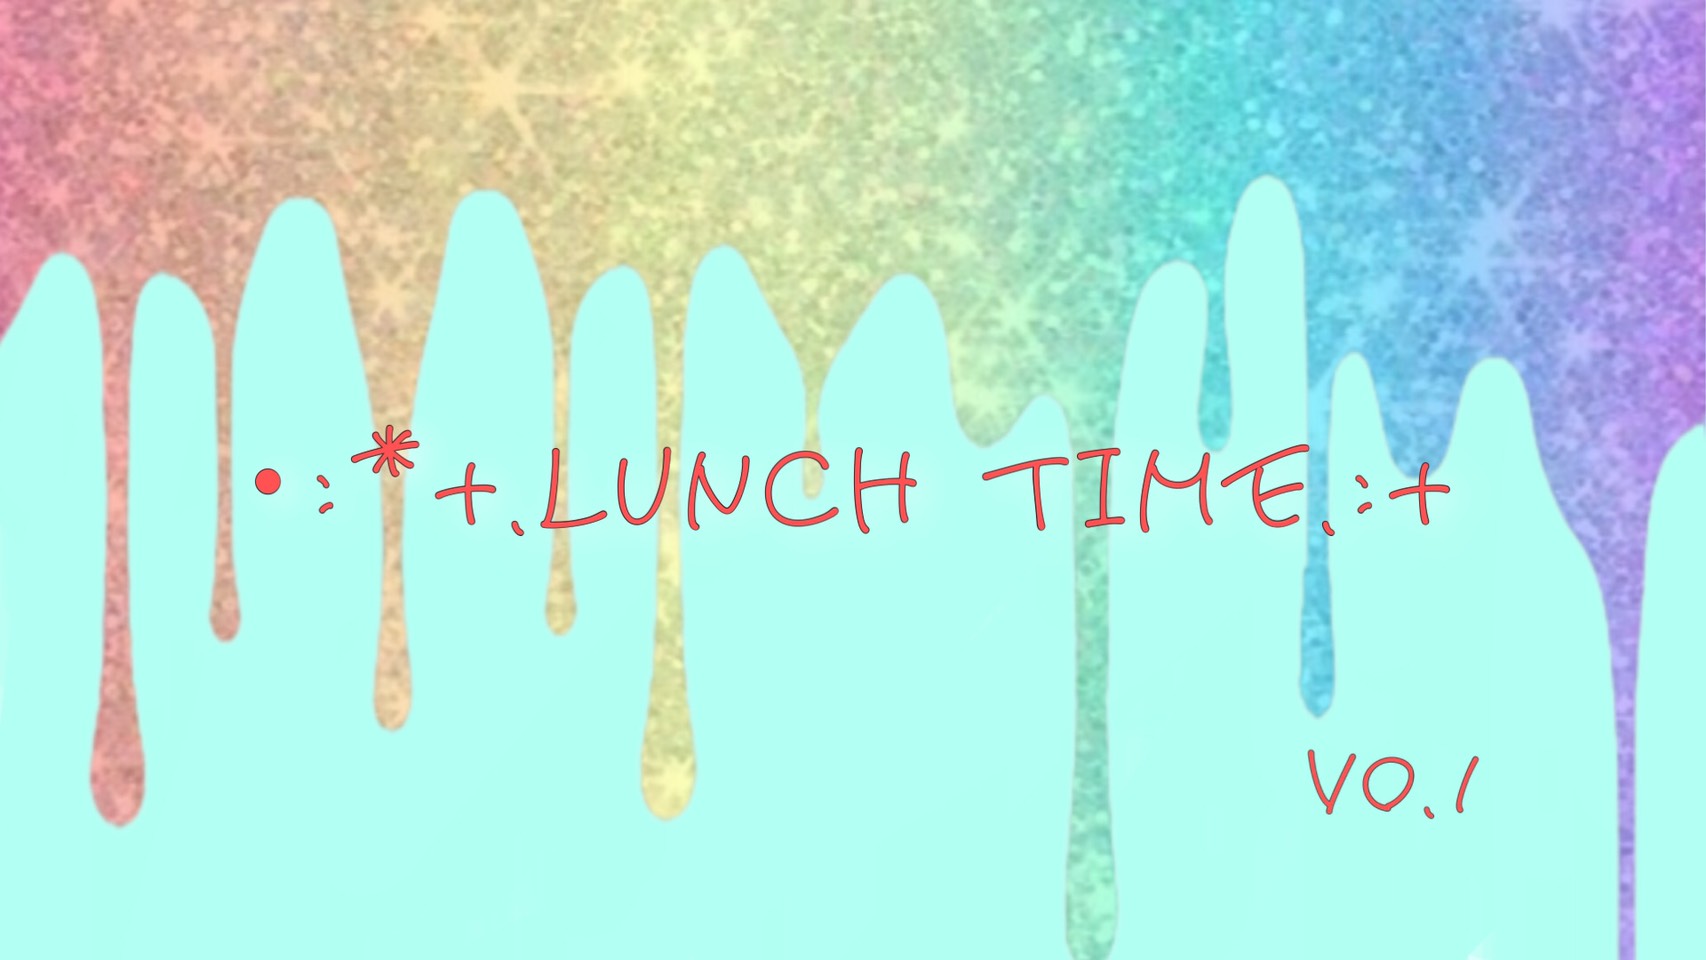 You are currently viewing *.゜Lunch Time｡:+*.Vol.1